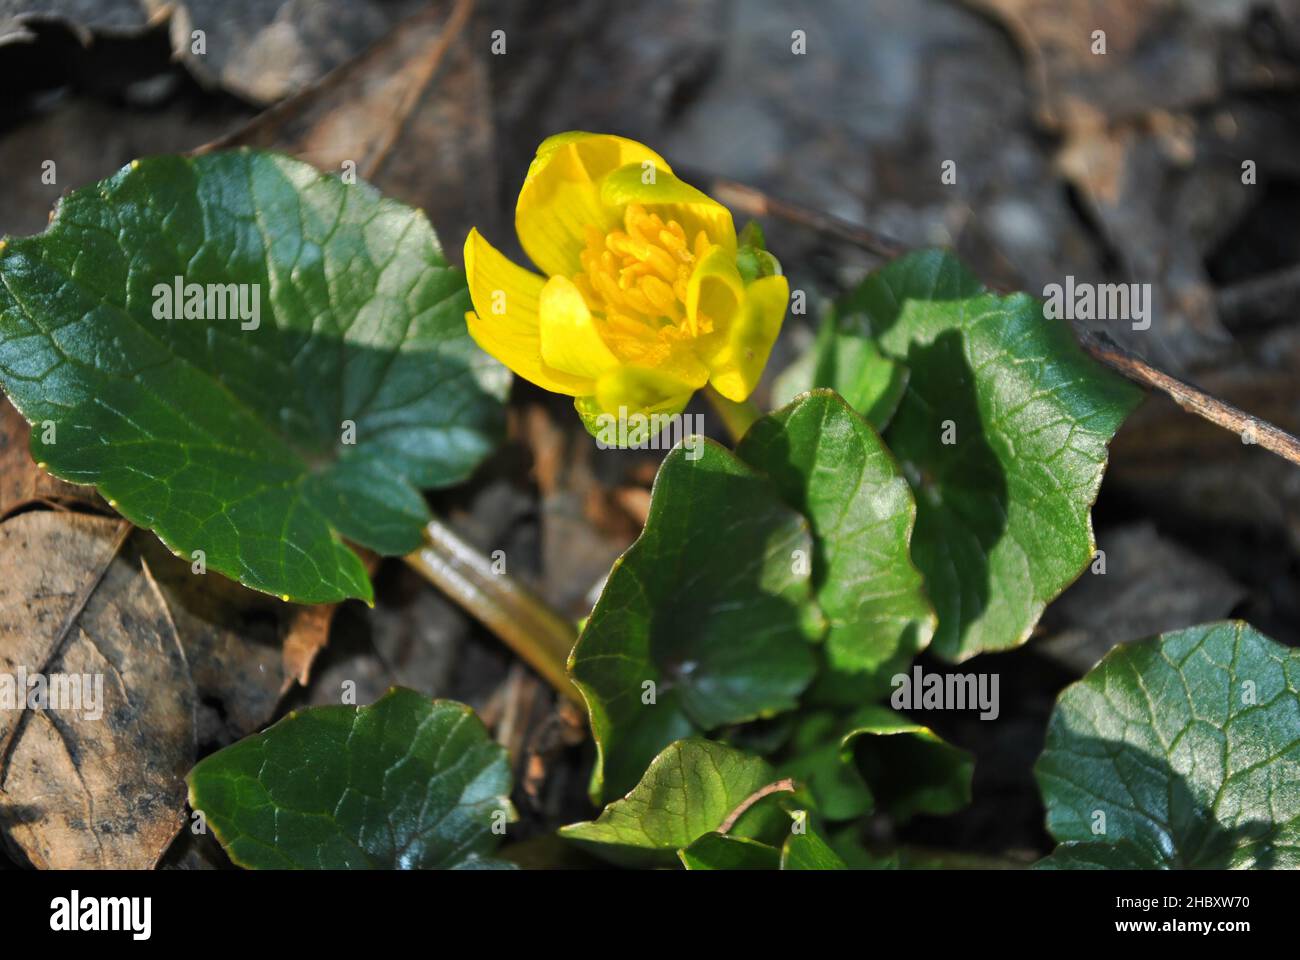 First spring flower of yellow Caltha (buttercup) in the background of rotten leaves, top horizontal view, close up detail Stock Photo